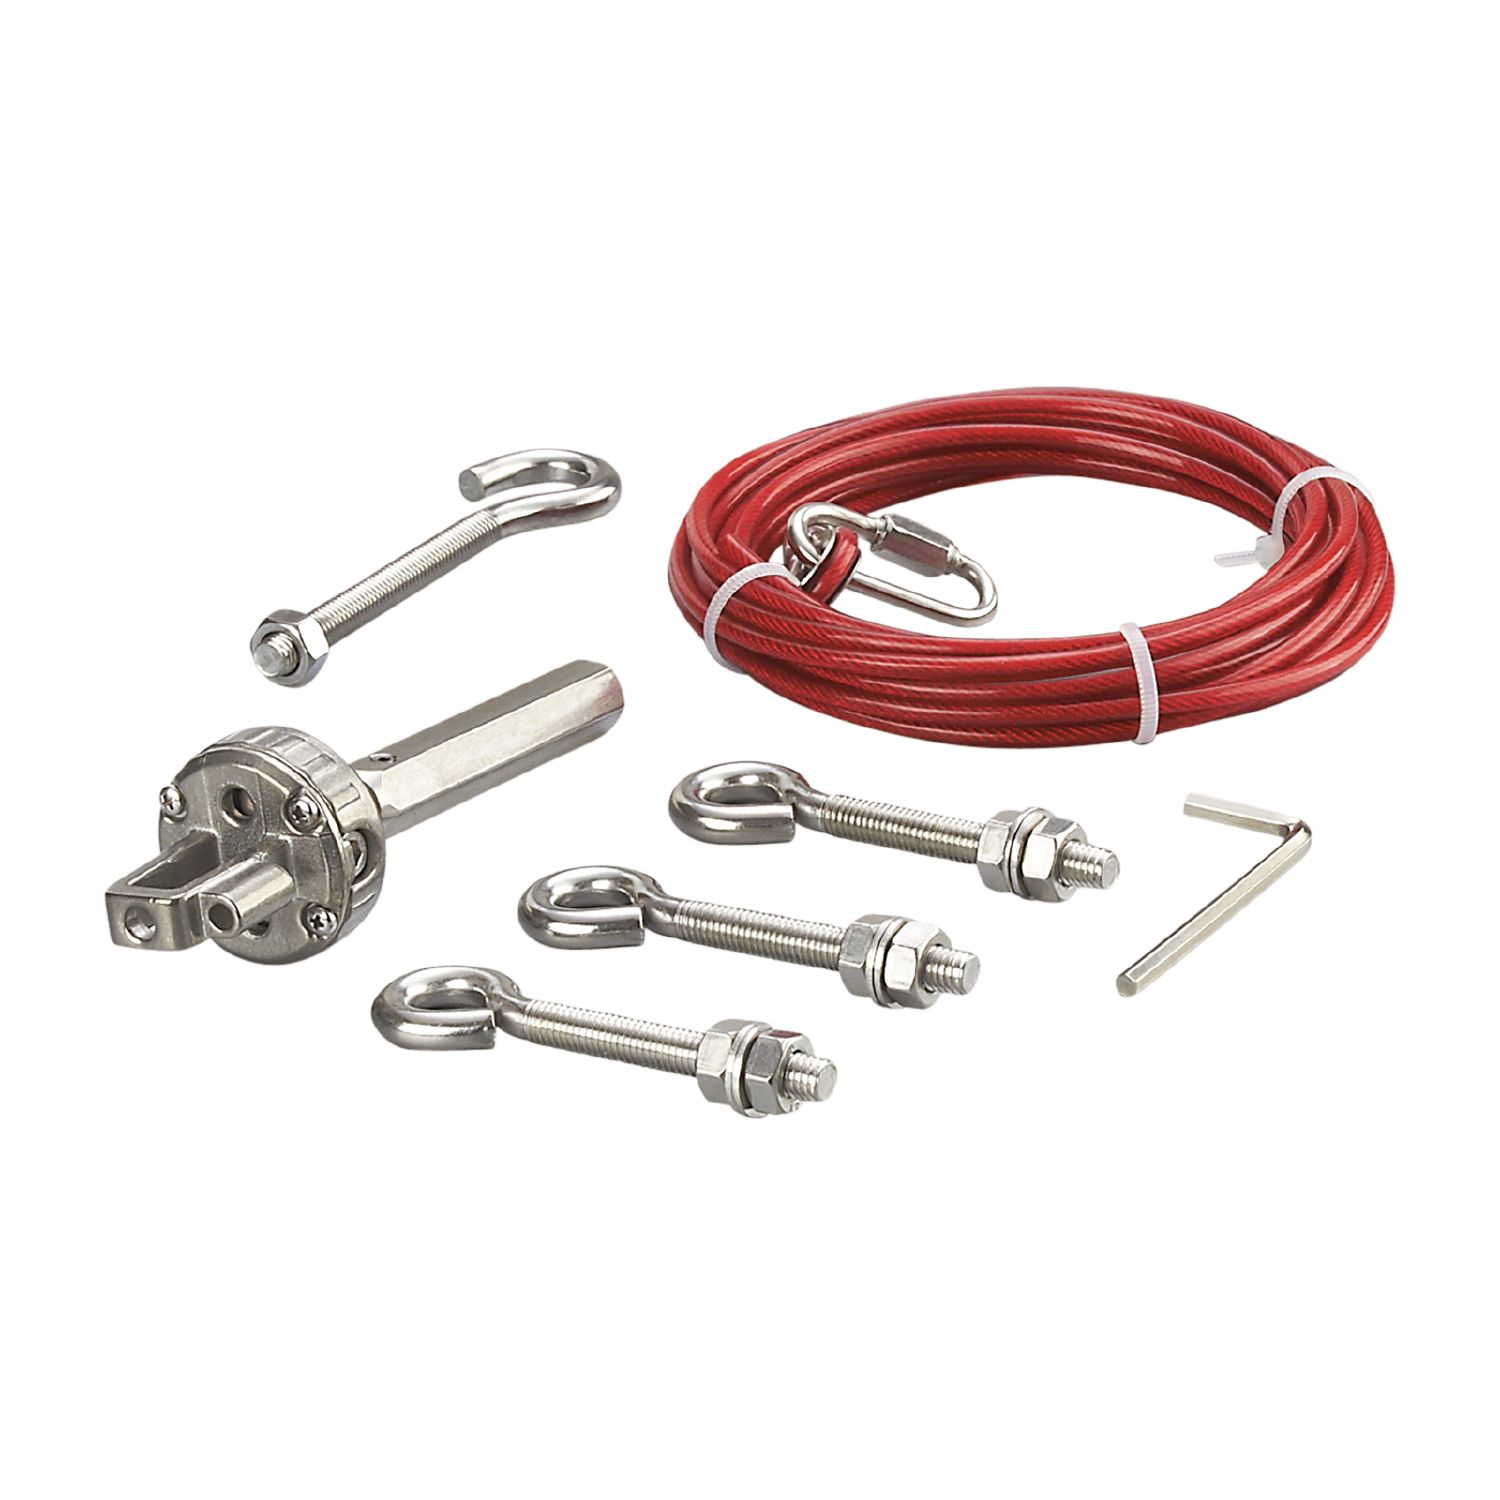 ZB0054 - Rope tension kit for safety rope E-STOP - ifm